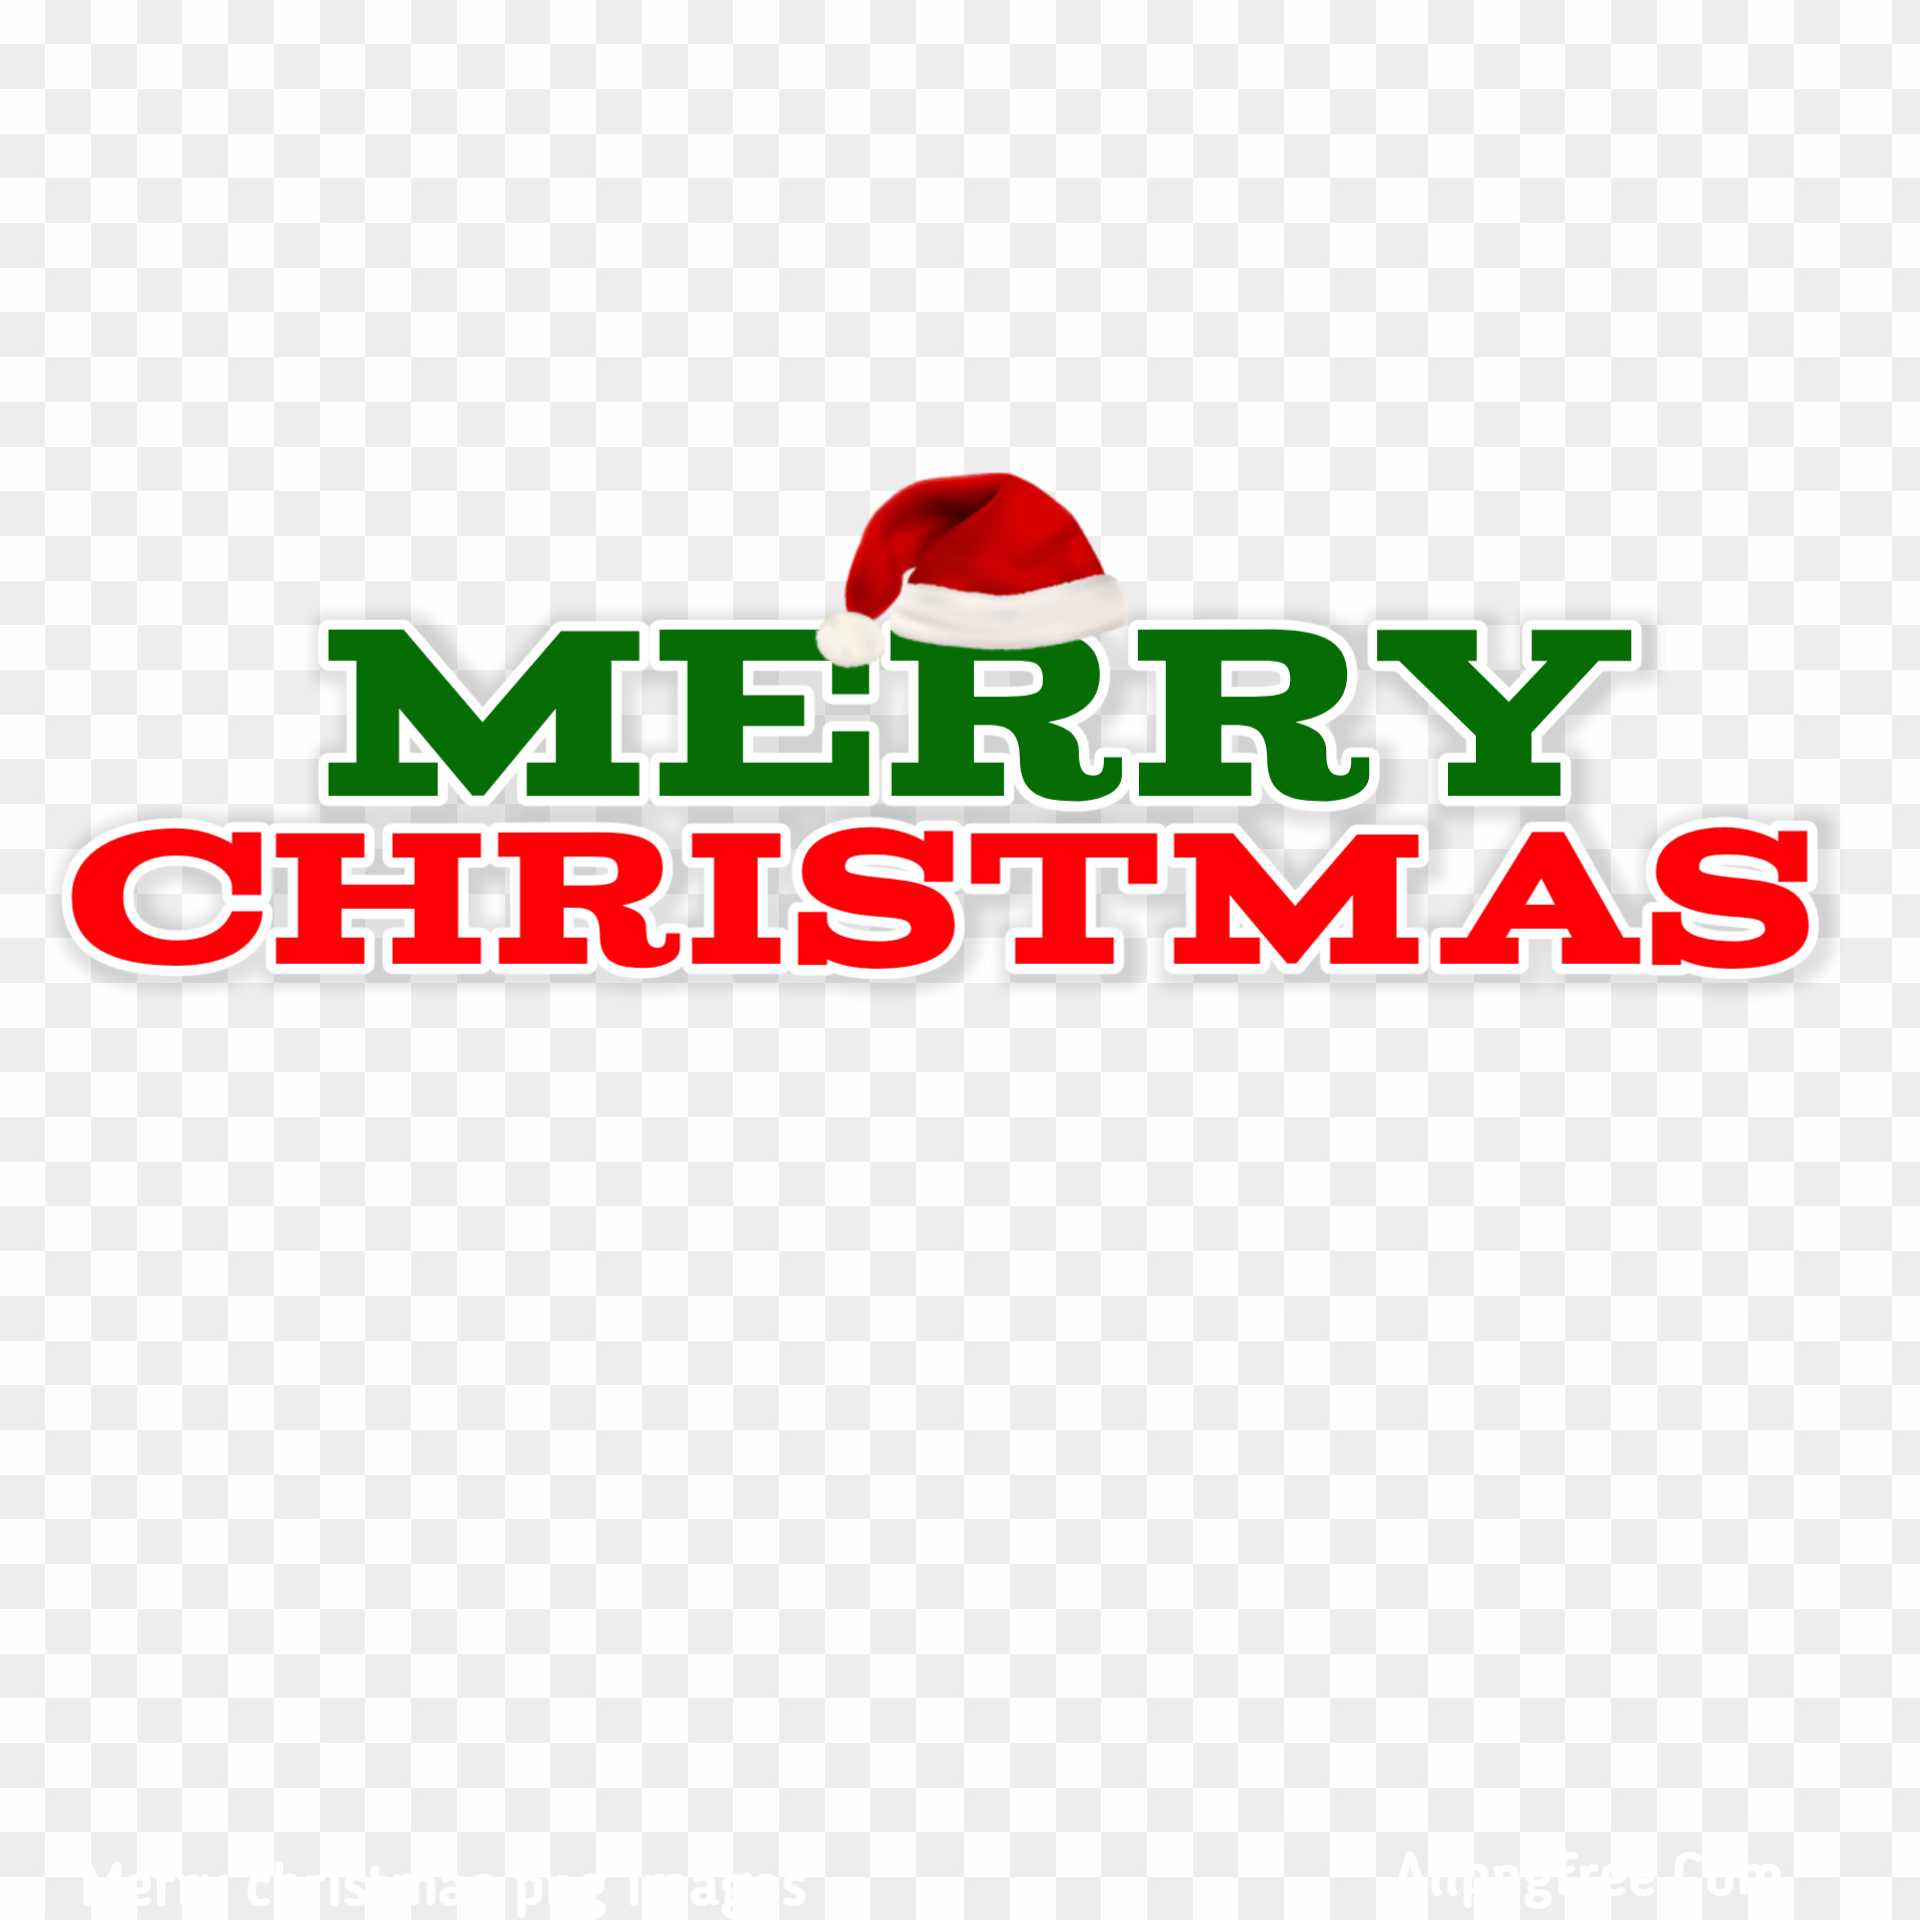 Merry Christmas PNG images download 